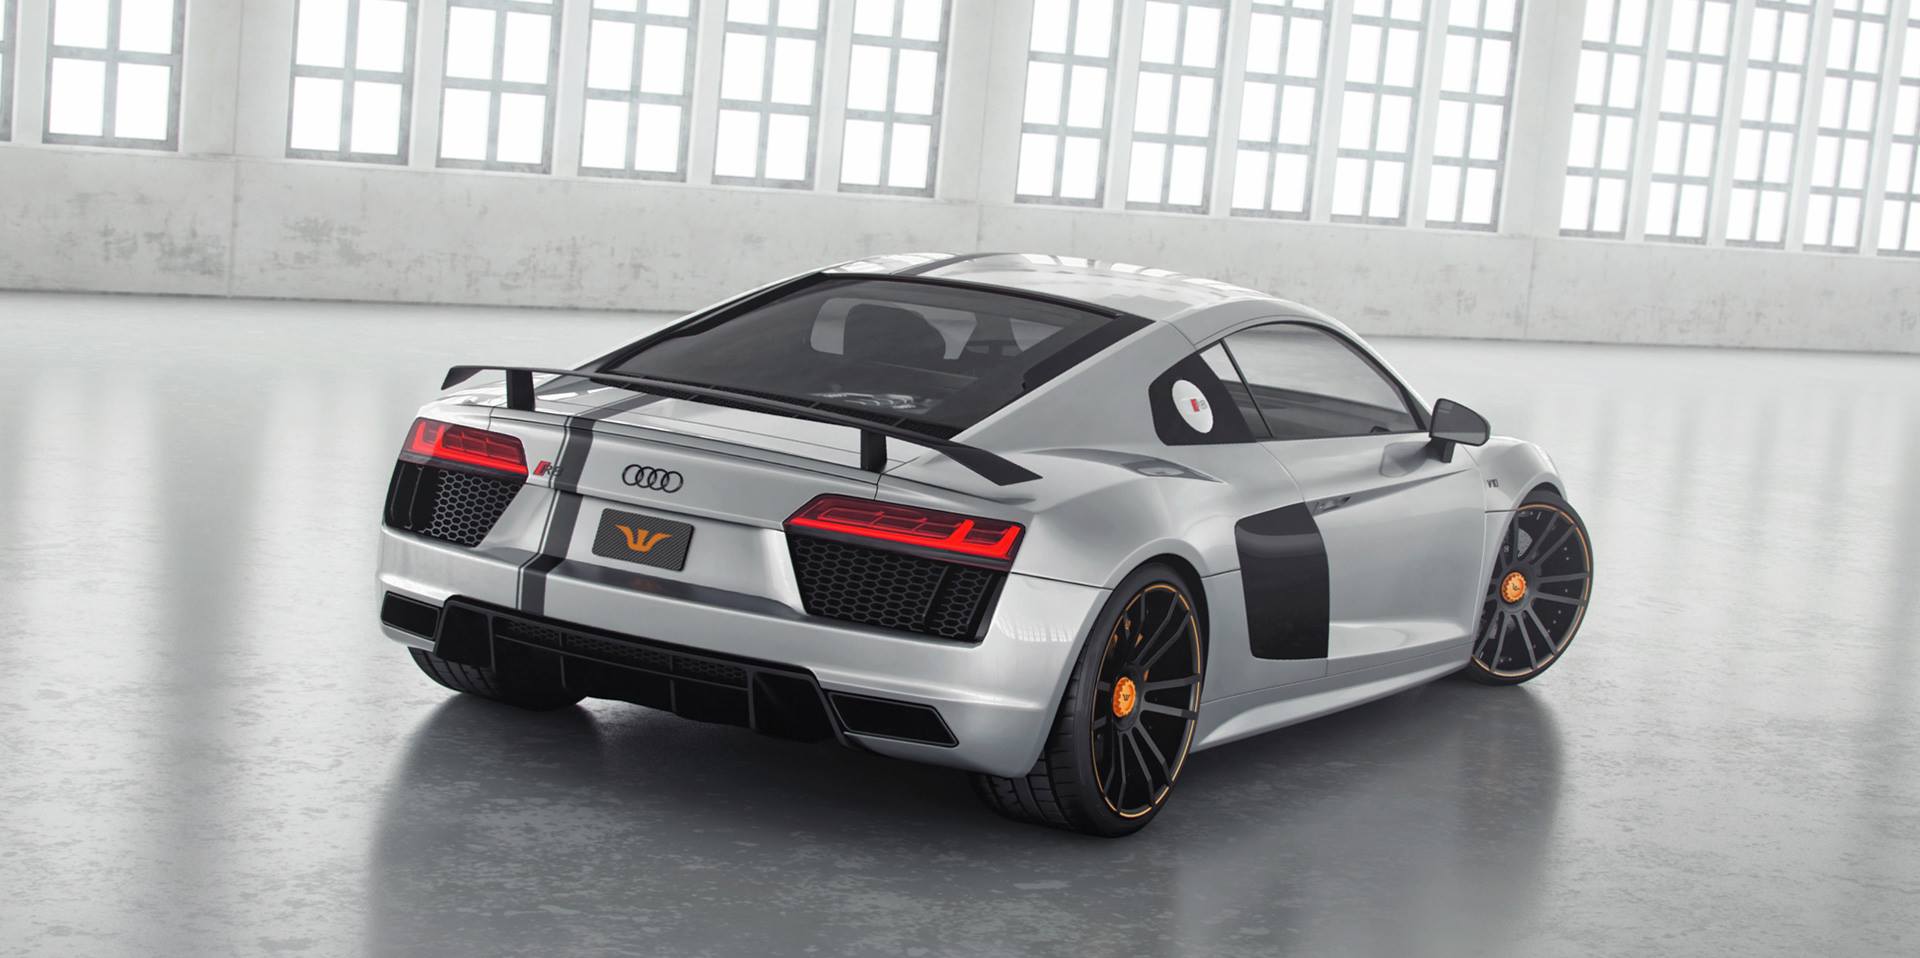 2017 Audi R8 by Wheelsandmore Has 850 HP and Looks Decent - photo ...